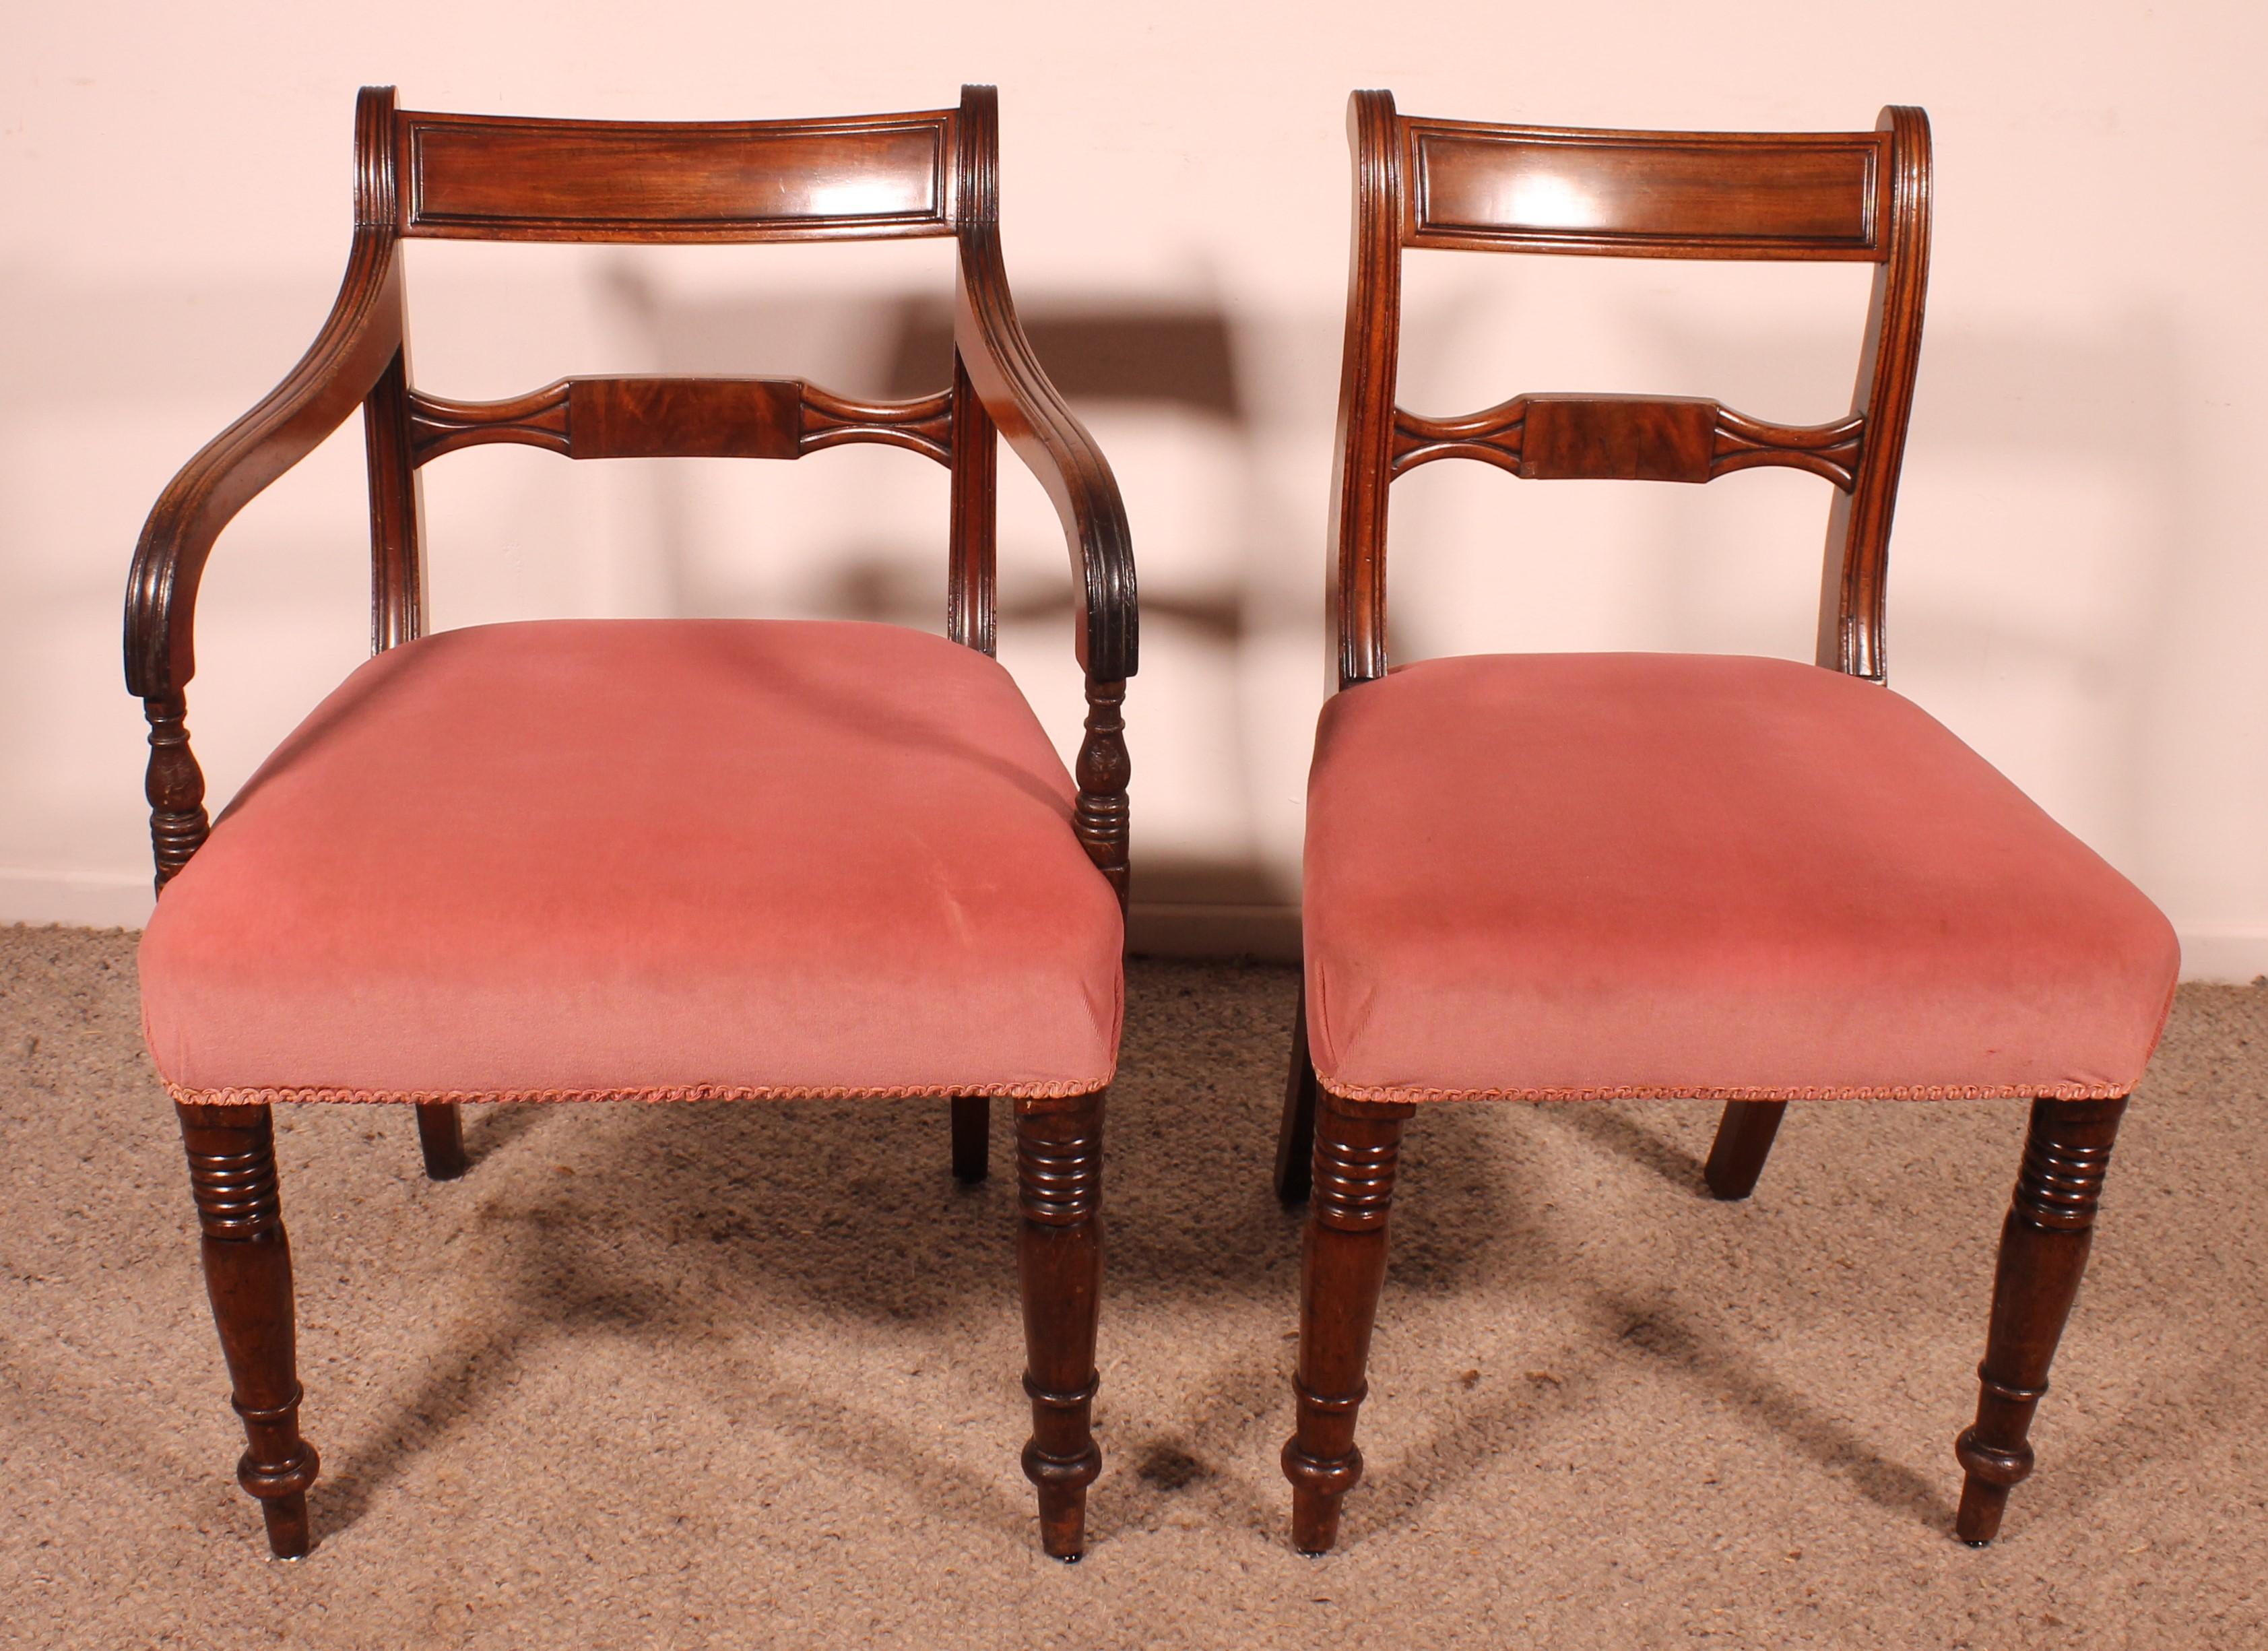 Georgian Set Of 4 Chairs And Two Armchairs From The 18th Century In Mahogany For Sale